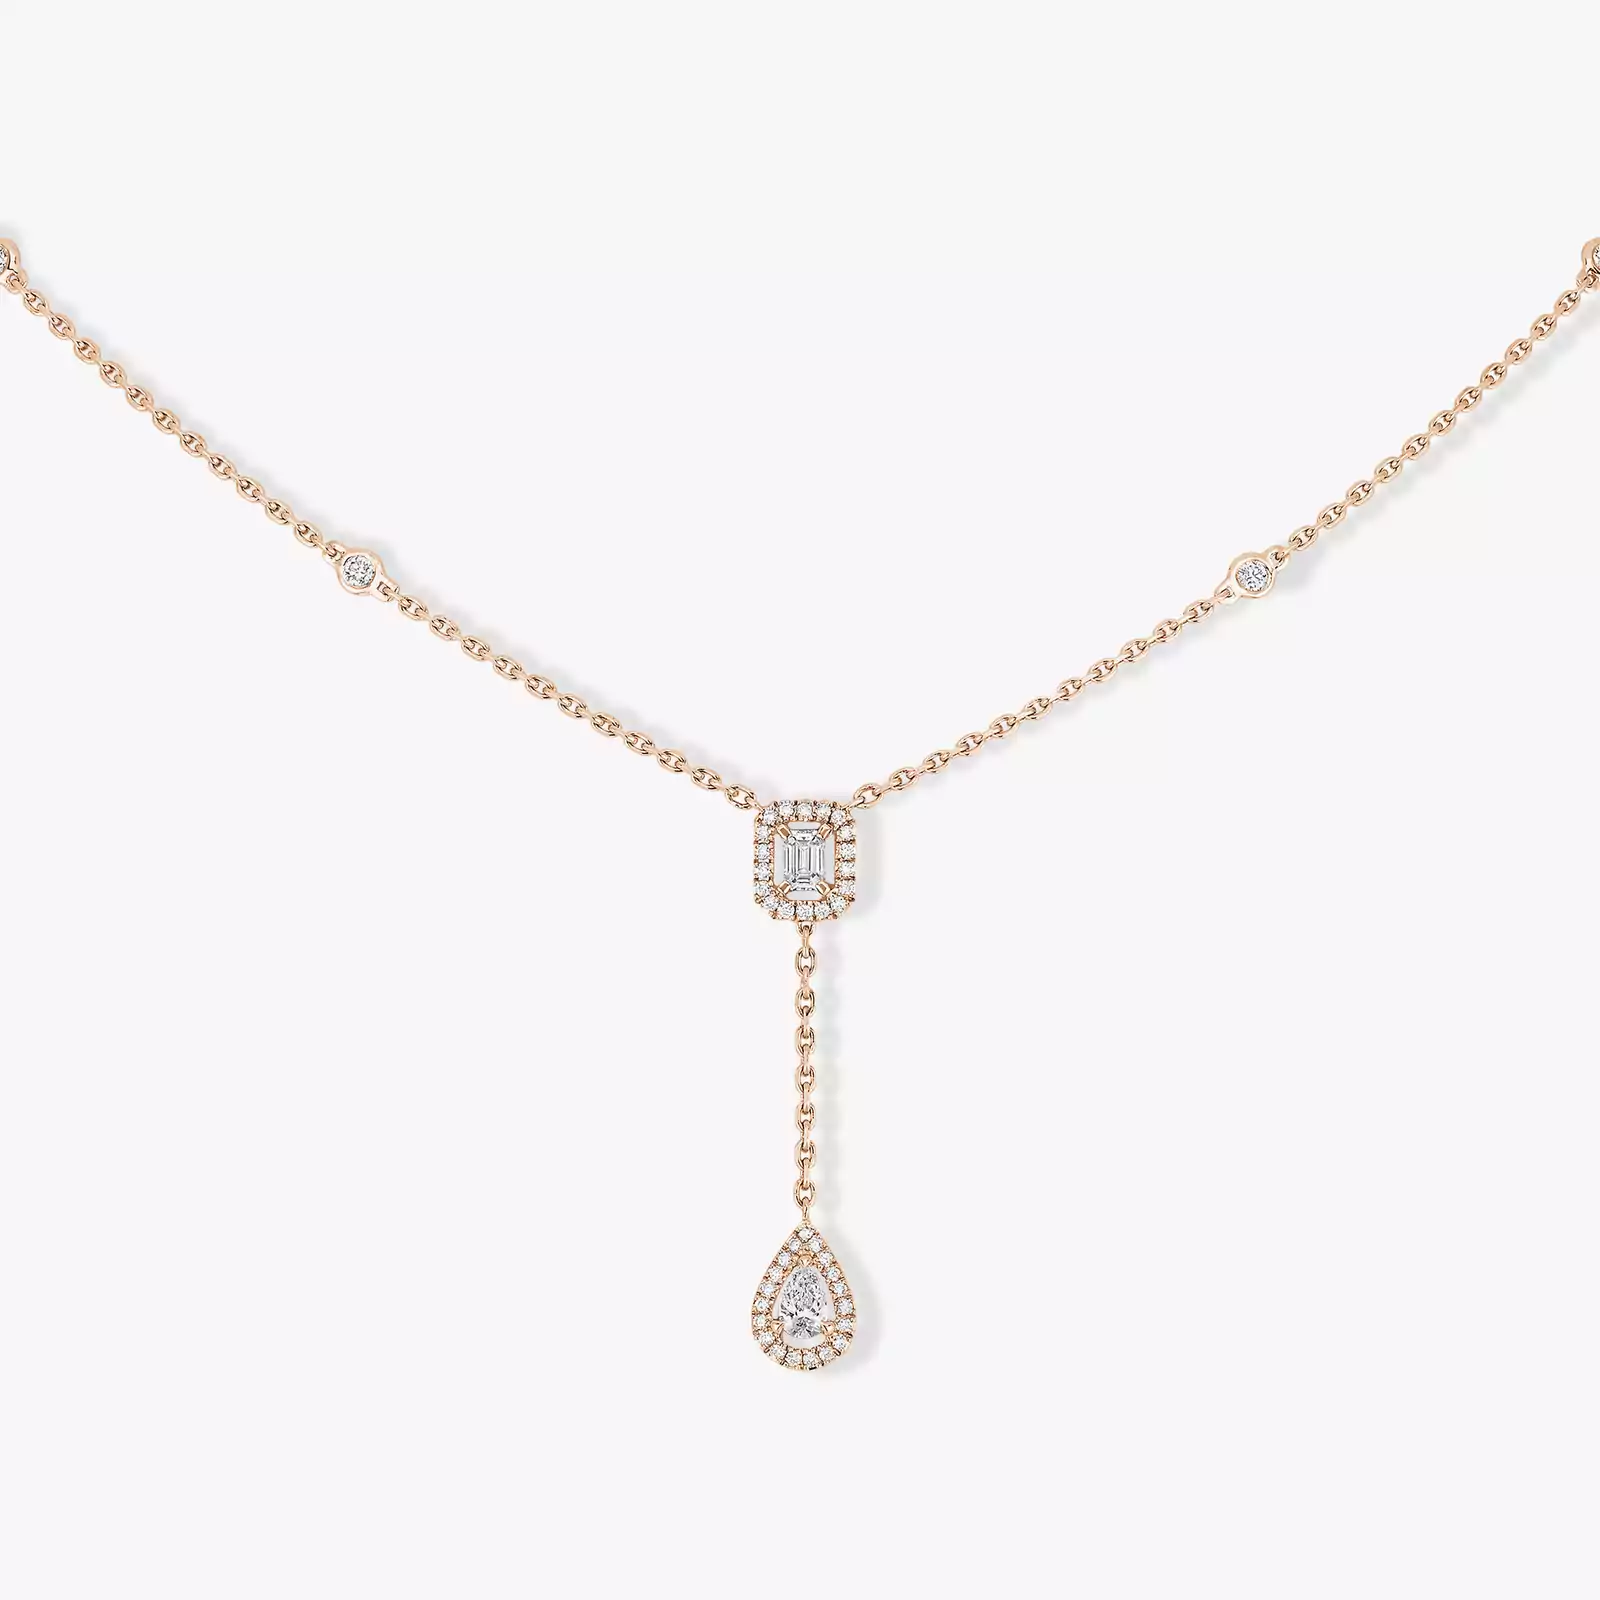 Necklace For Her Pink Gold Diamond My Twin Tie 0.10ct x2 06693-PG